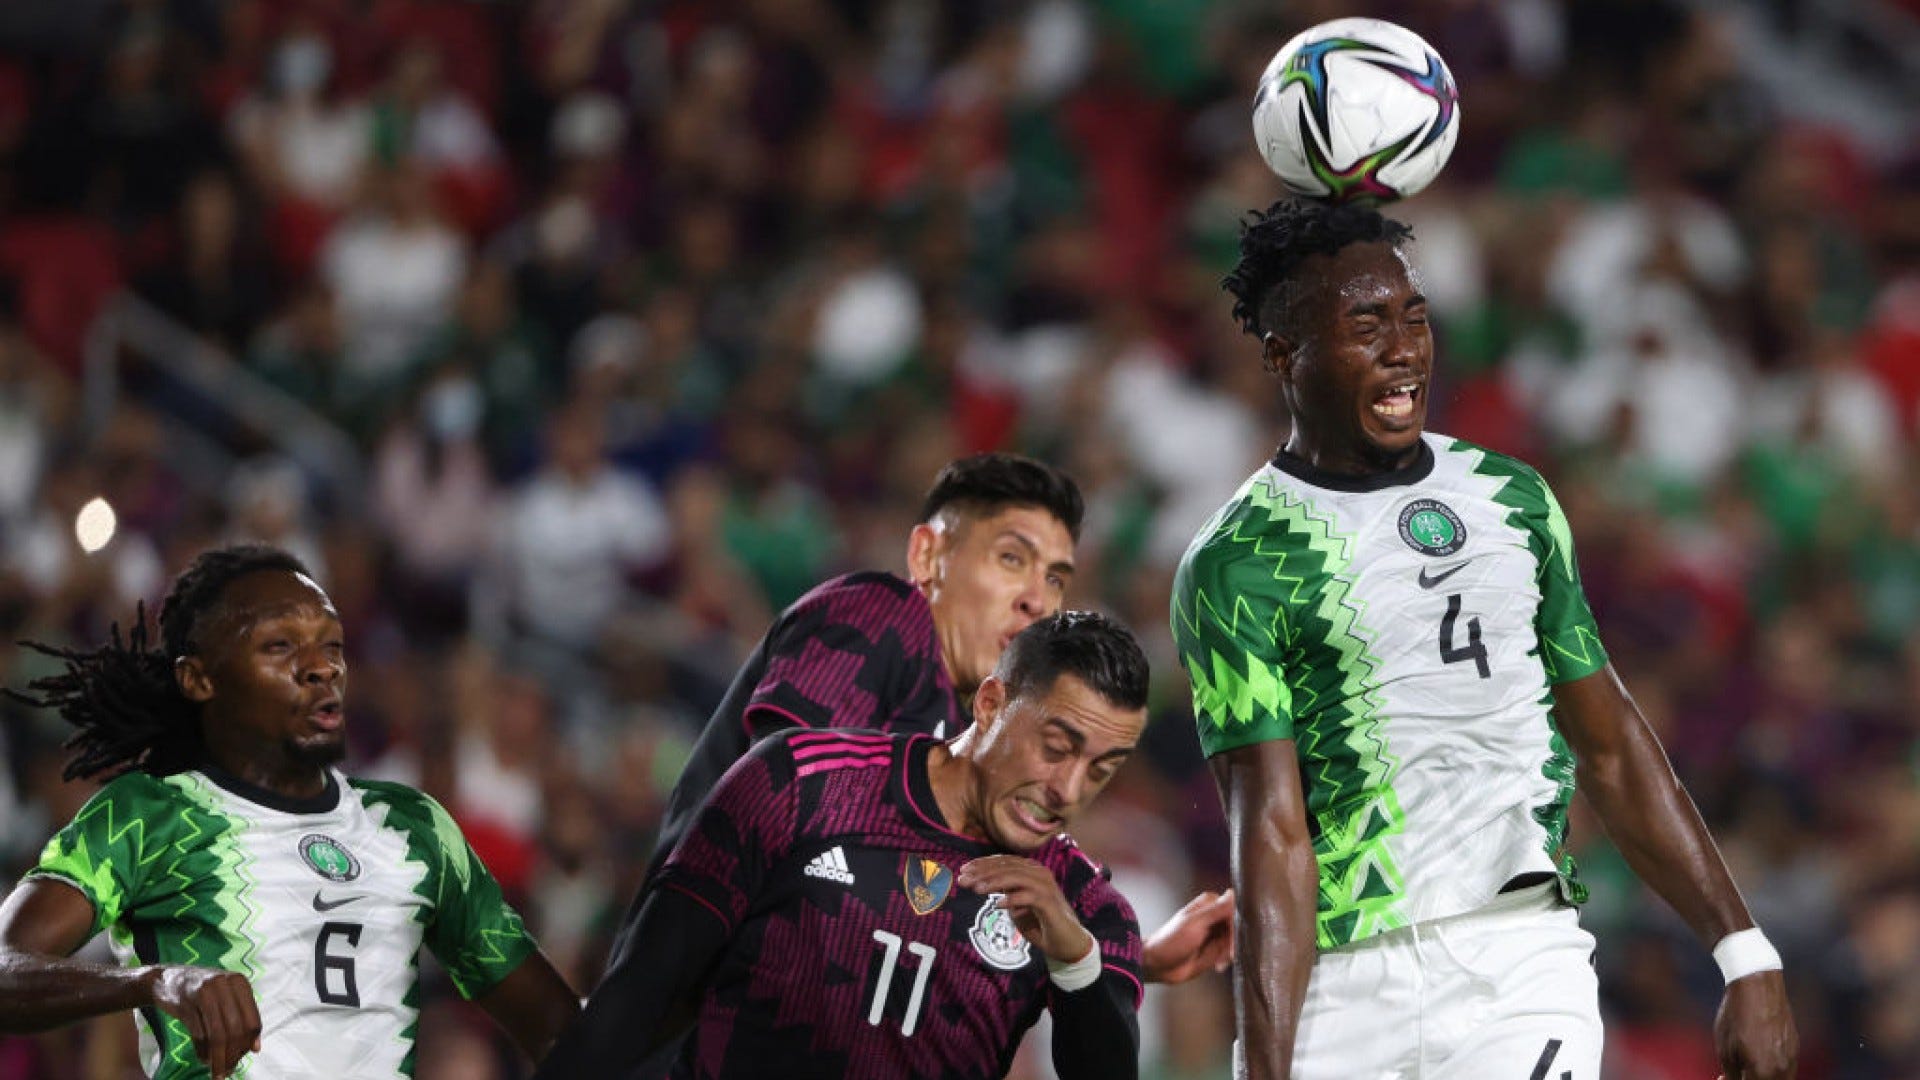 Mexico vs nigeria betting preview william hill betting shop rules